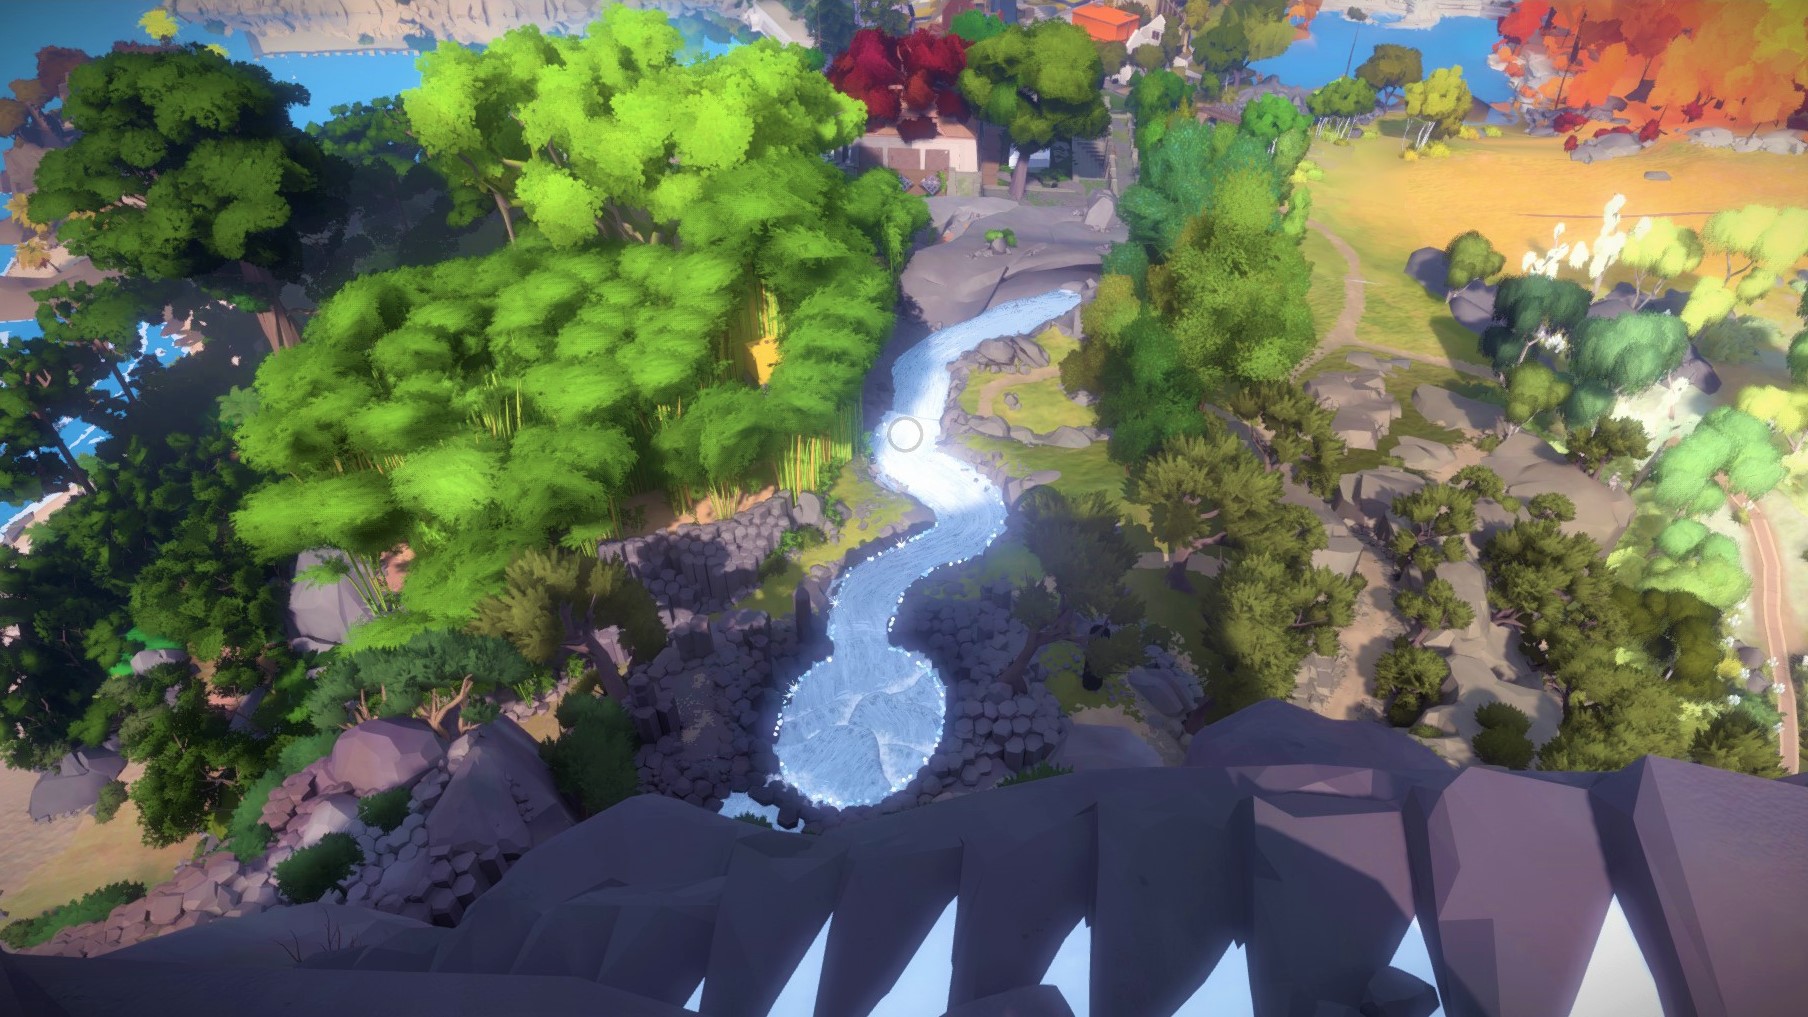  Great moments in PC gaming: Spotting your first environmental puzzle in The Witness 